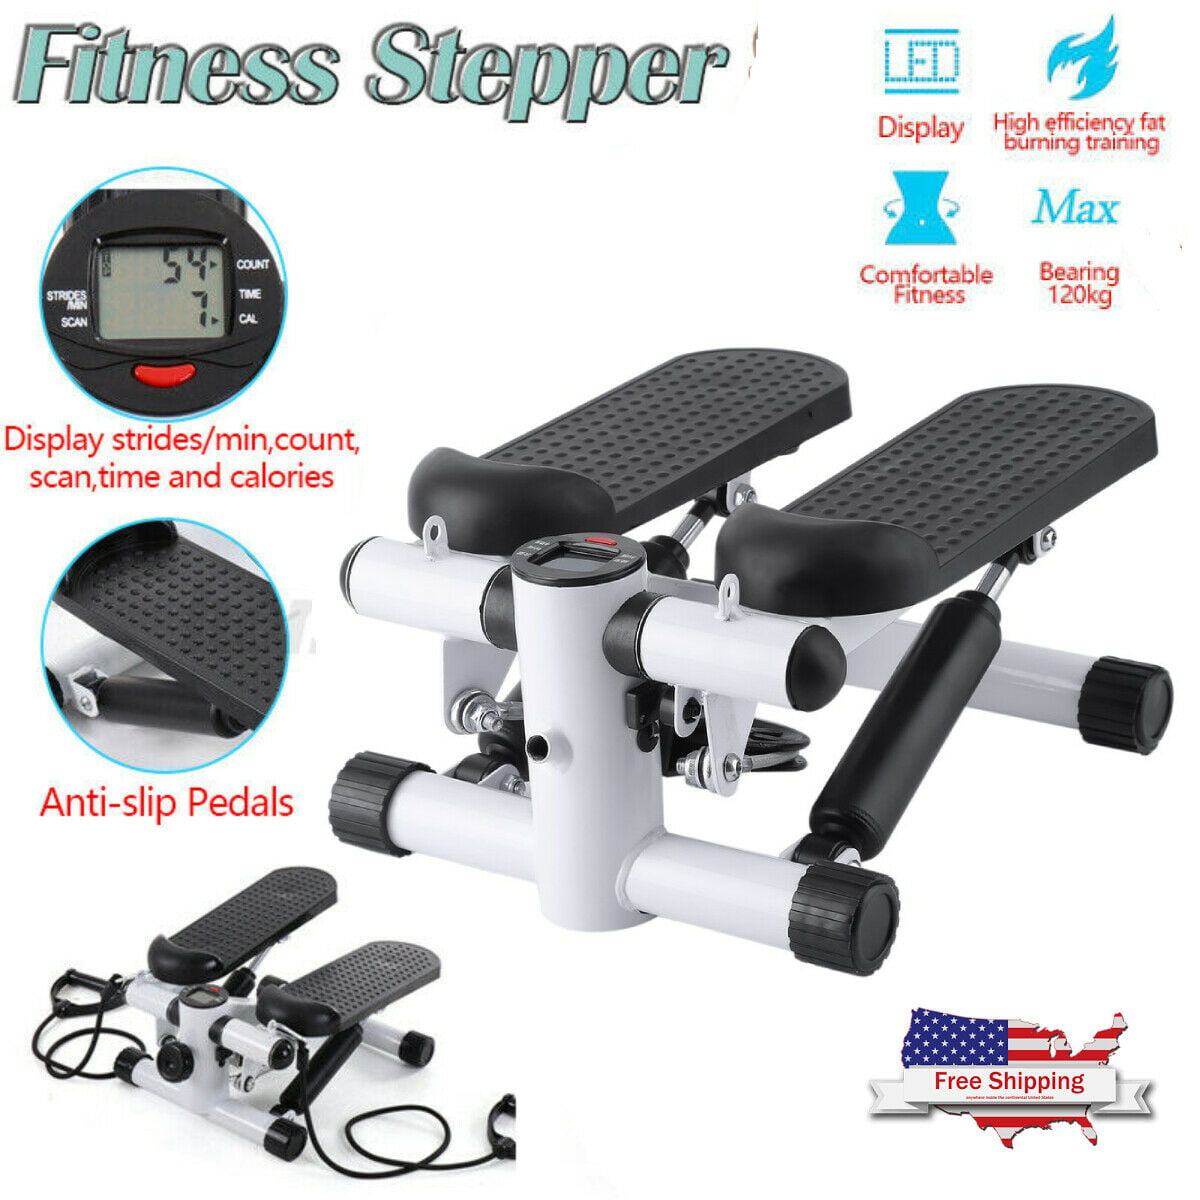 Mini-Stepper,w/Handle Bar and Resistance Band,Swing Stepper Twist Stepper Step Machine Fitness Stair Stepper,For Beginners and Advanced Users,Max Load 120Kg 